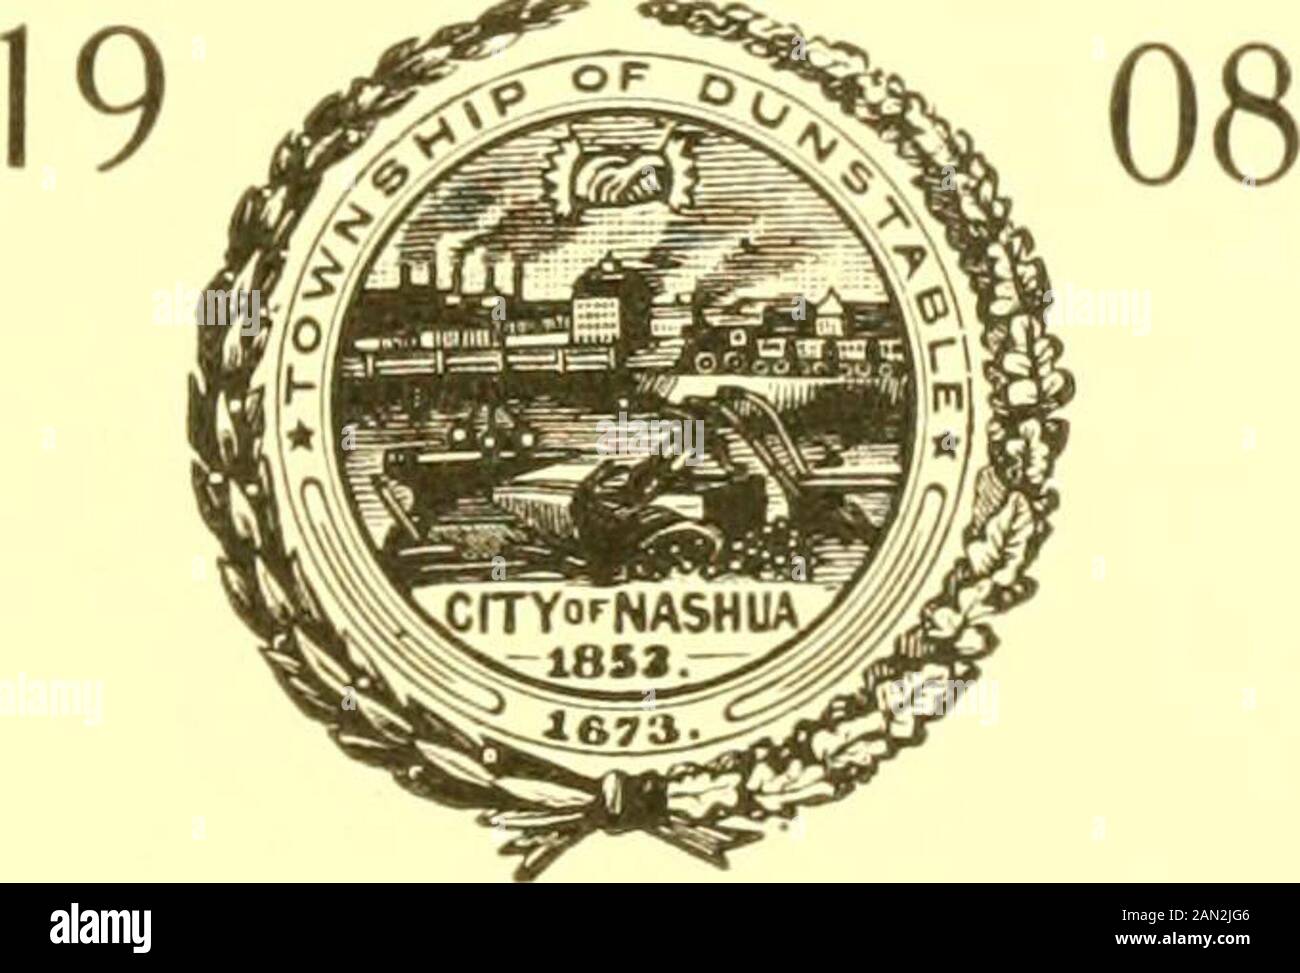 Report of the receipts and expenditures of the City of Nashua . Gall stones Heart disease Convulsions Pneumonia Chronic D. nephritis.... Chronic nephritis Heart disease Iremia Paralysis Heart disease Senile debility Cerebral hemorrhage... Broncho-pneumonia Suicide Debility Endocarditis Myocarditis Pulmonary embolism ... Thyroid goitre Disease of kidneys Cancer of stomach Malnutrition Cholera infantum Injuries, R. R. accident. Cancer Gastric indigestion Natural causes Peritonitis Dysentery Senile decay Heartdisease Gastro enteritis Meningitis Heart disease Tuberculosis Sarcoma Gastro enteritis Stock Photo